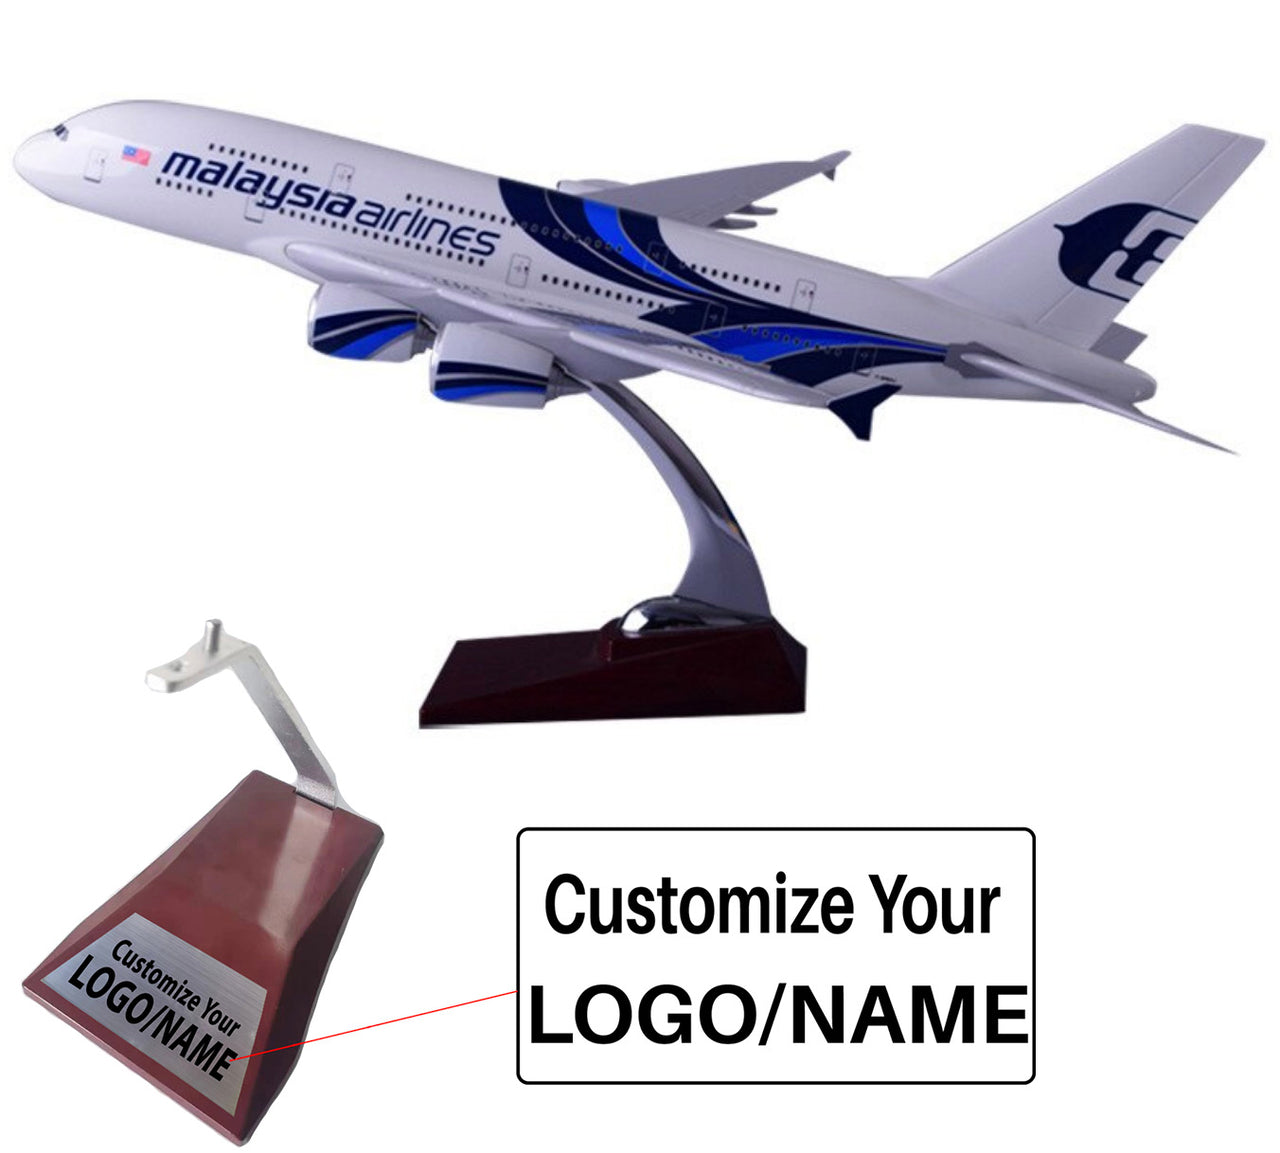 Malaysia Airlines Airbus A380 Airplane Model (Handmade 45CM)